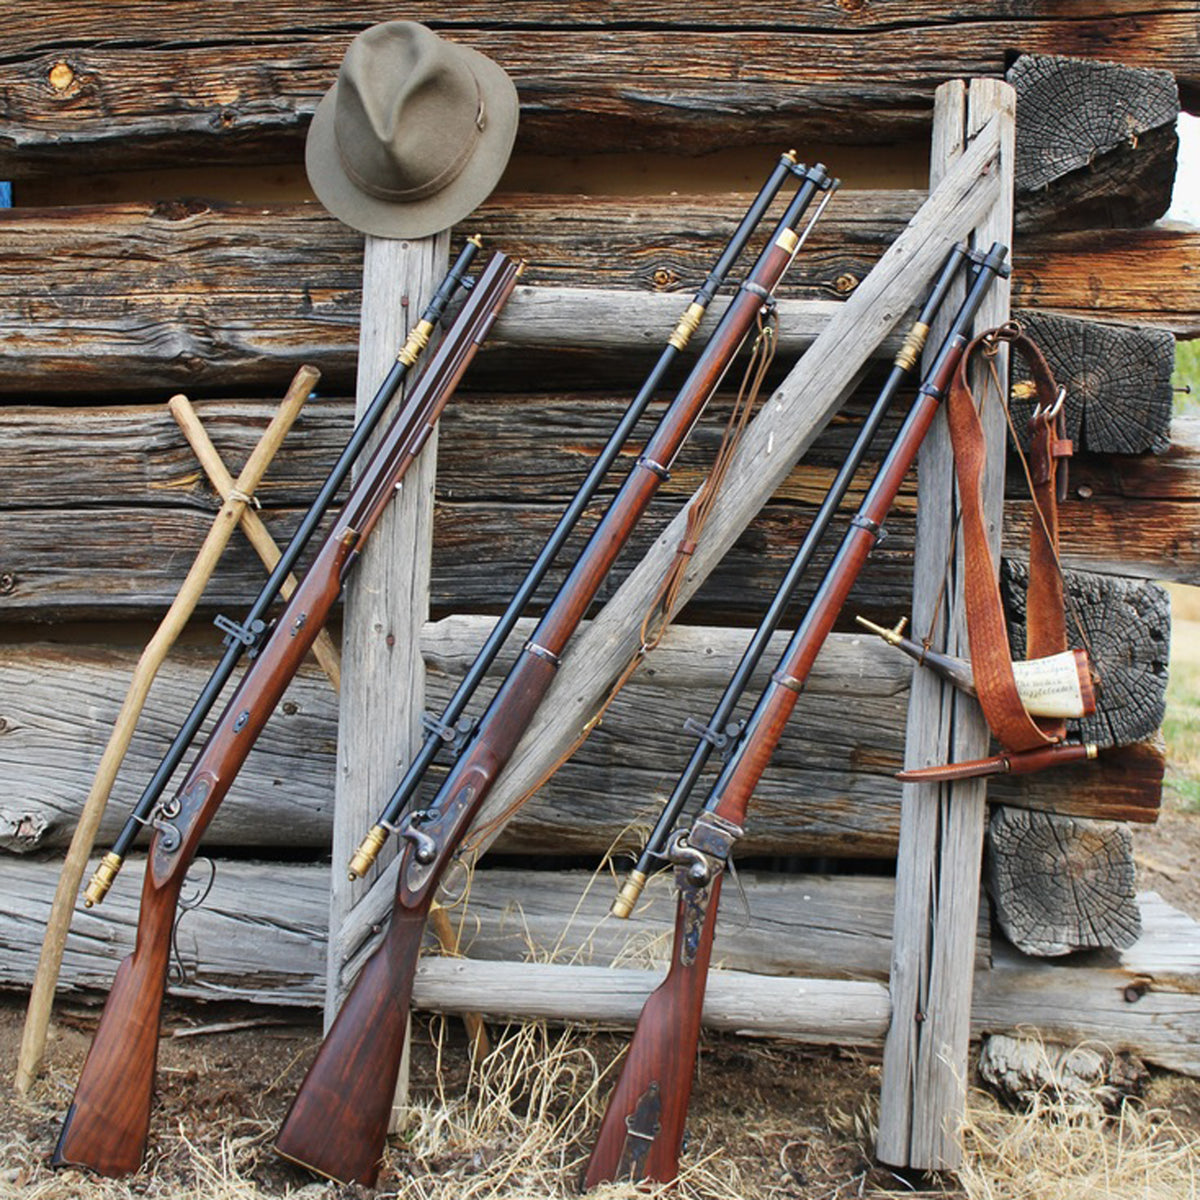 The 6X Long Malcolm Scope mounted on a variety of percussion rifles